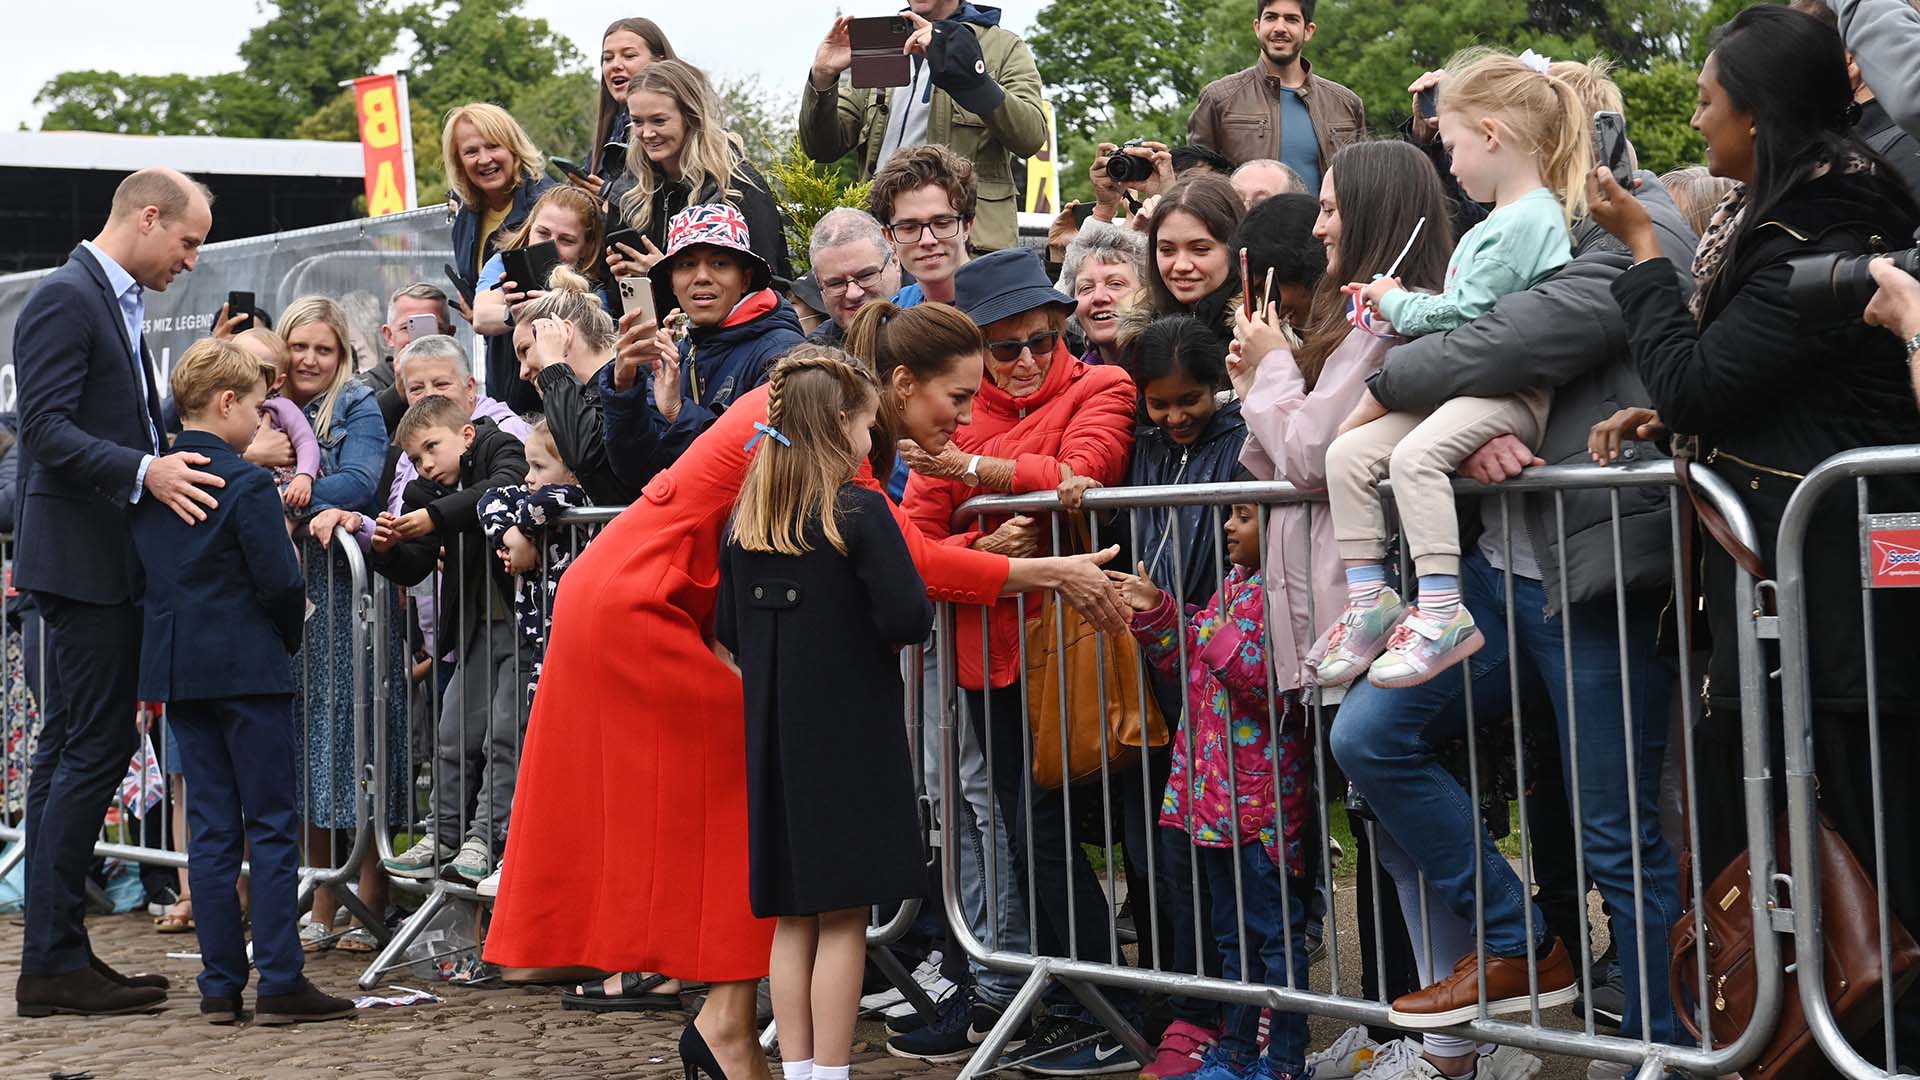 The Duke and Duchess of Cambridge, Prince George and Princess Charlotte meet well wishers during their visit to Cardiff Castle to meet performers and crew involved in the Platinum Jubilee Celebration Concert taking place in the castle grounds later in the afternoon, as members of the royal family visit the nations of the UK to celebrate Queen Elizabeth II's Platinum Jubilee. Picture date: Saturday June 4, 2022.